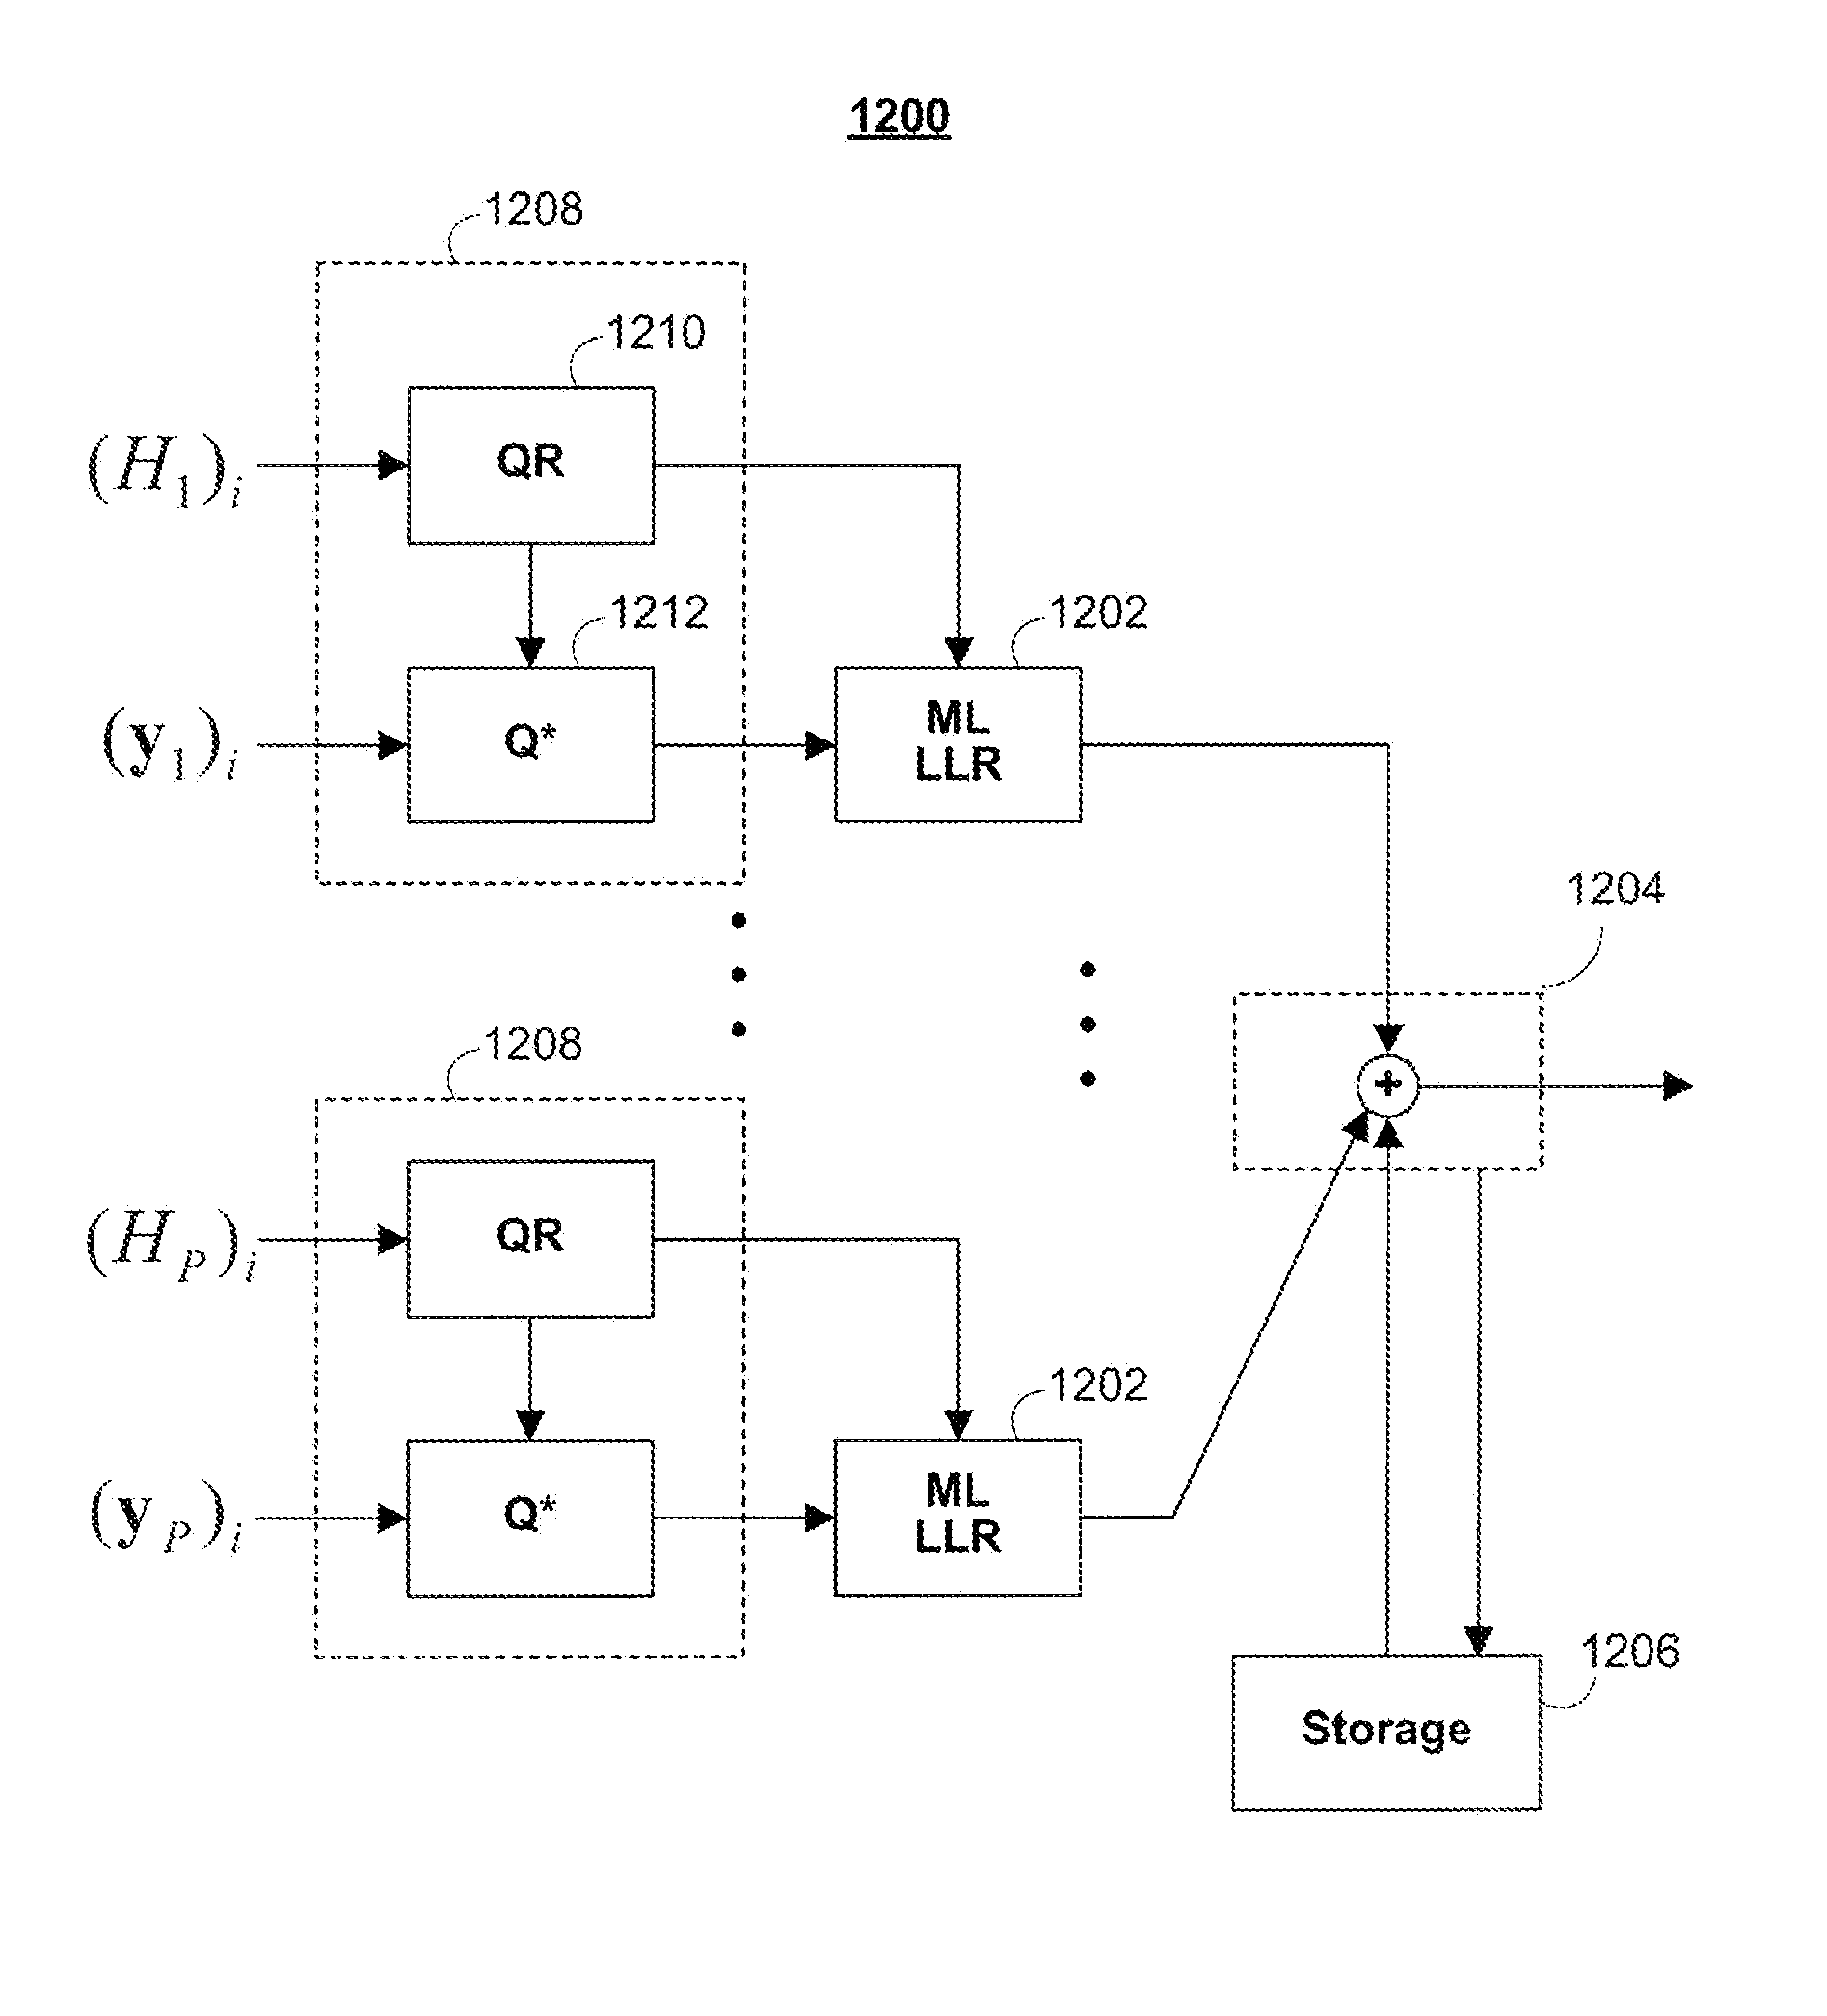 Bit-level combining for MIMO systems with HARQ and/or repetition coding